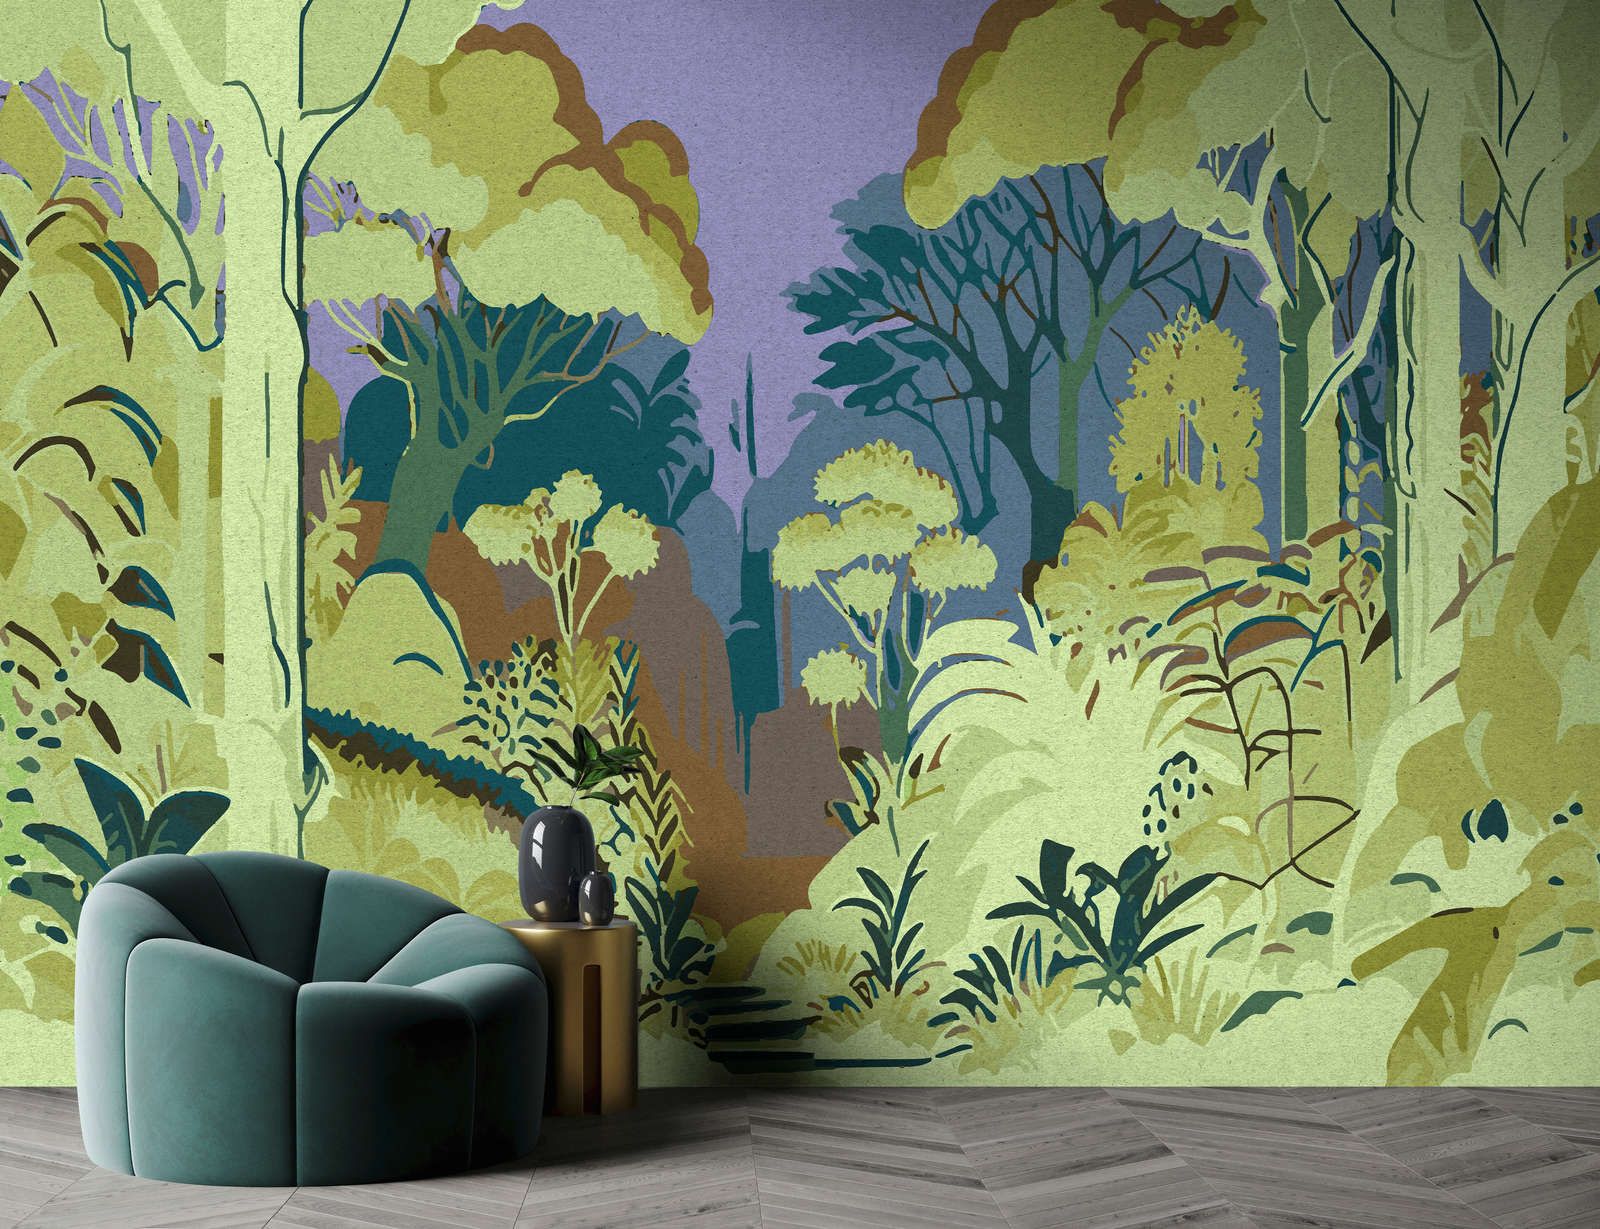             Photo wallpaper »runa« - Abstract jungle motif with kraft paper texture - Lightly textured non-woven fabric
        